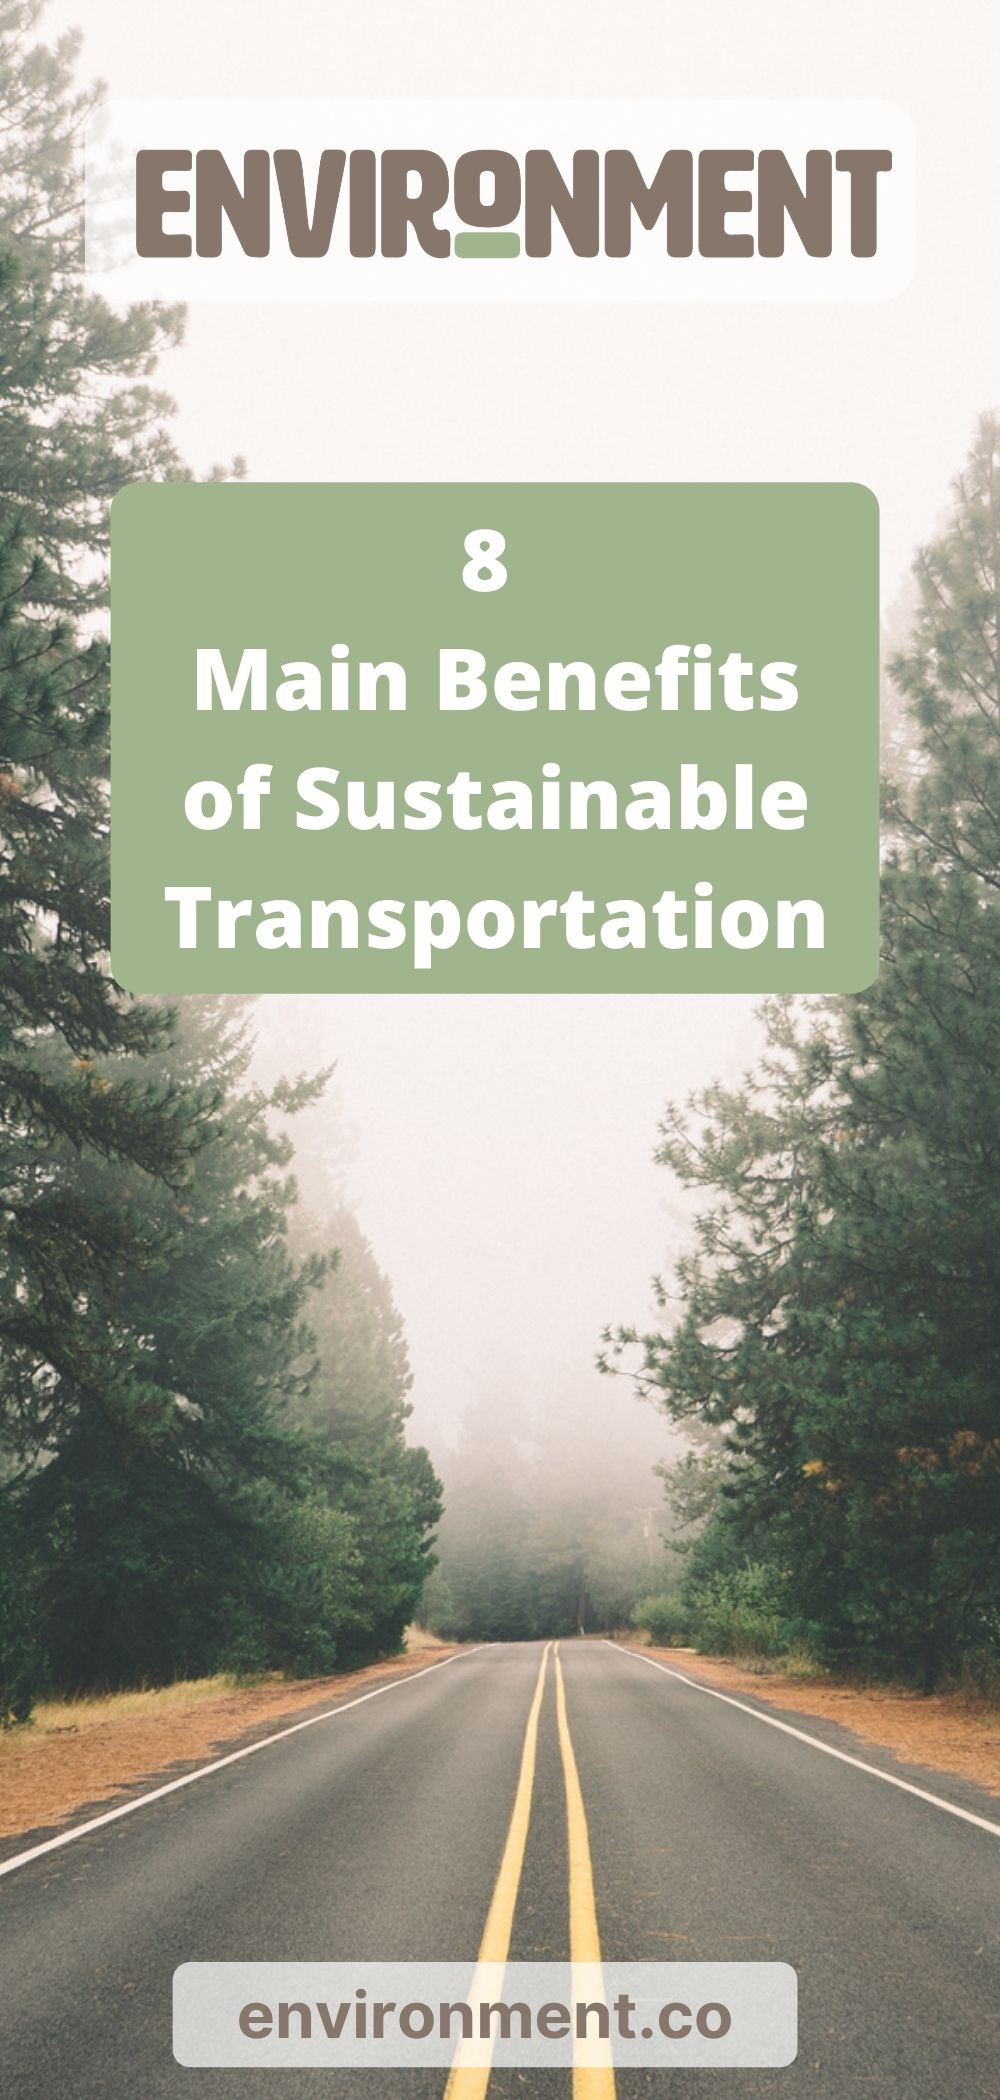 essay about sustainable transport